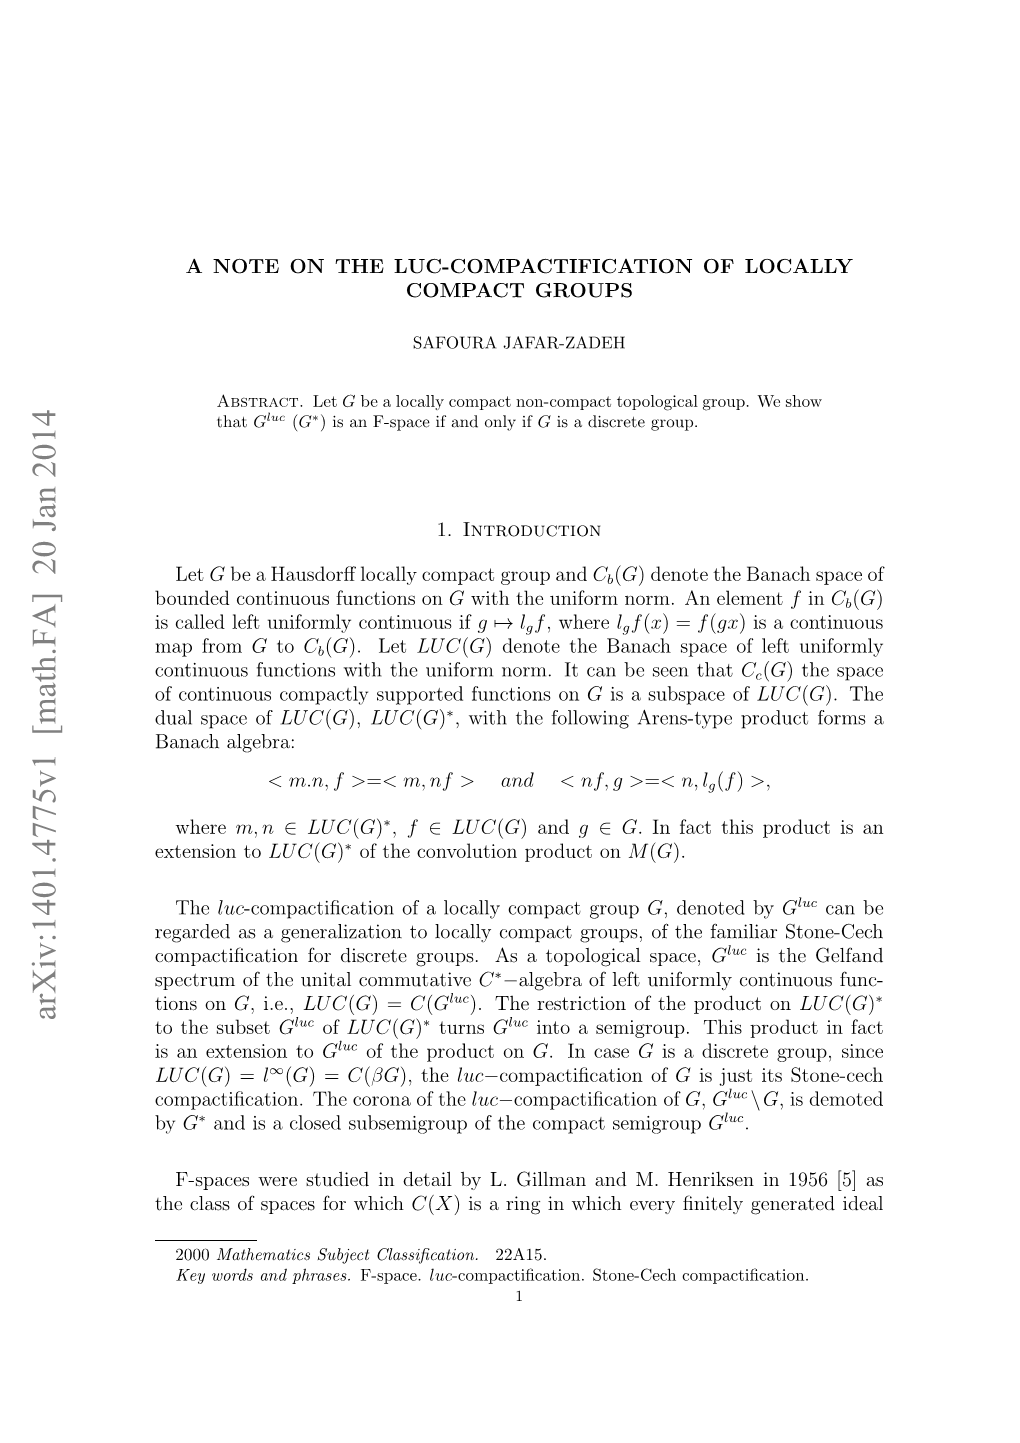 A Note on the $ Luc-$ Compactification of Locally Compact Groups